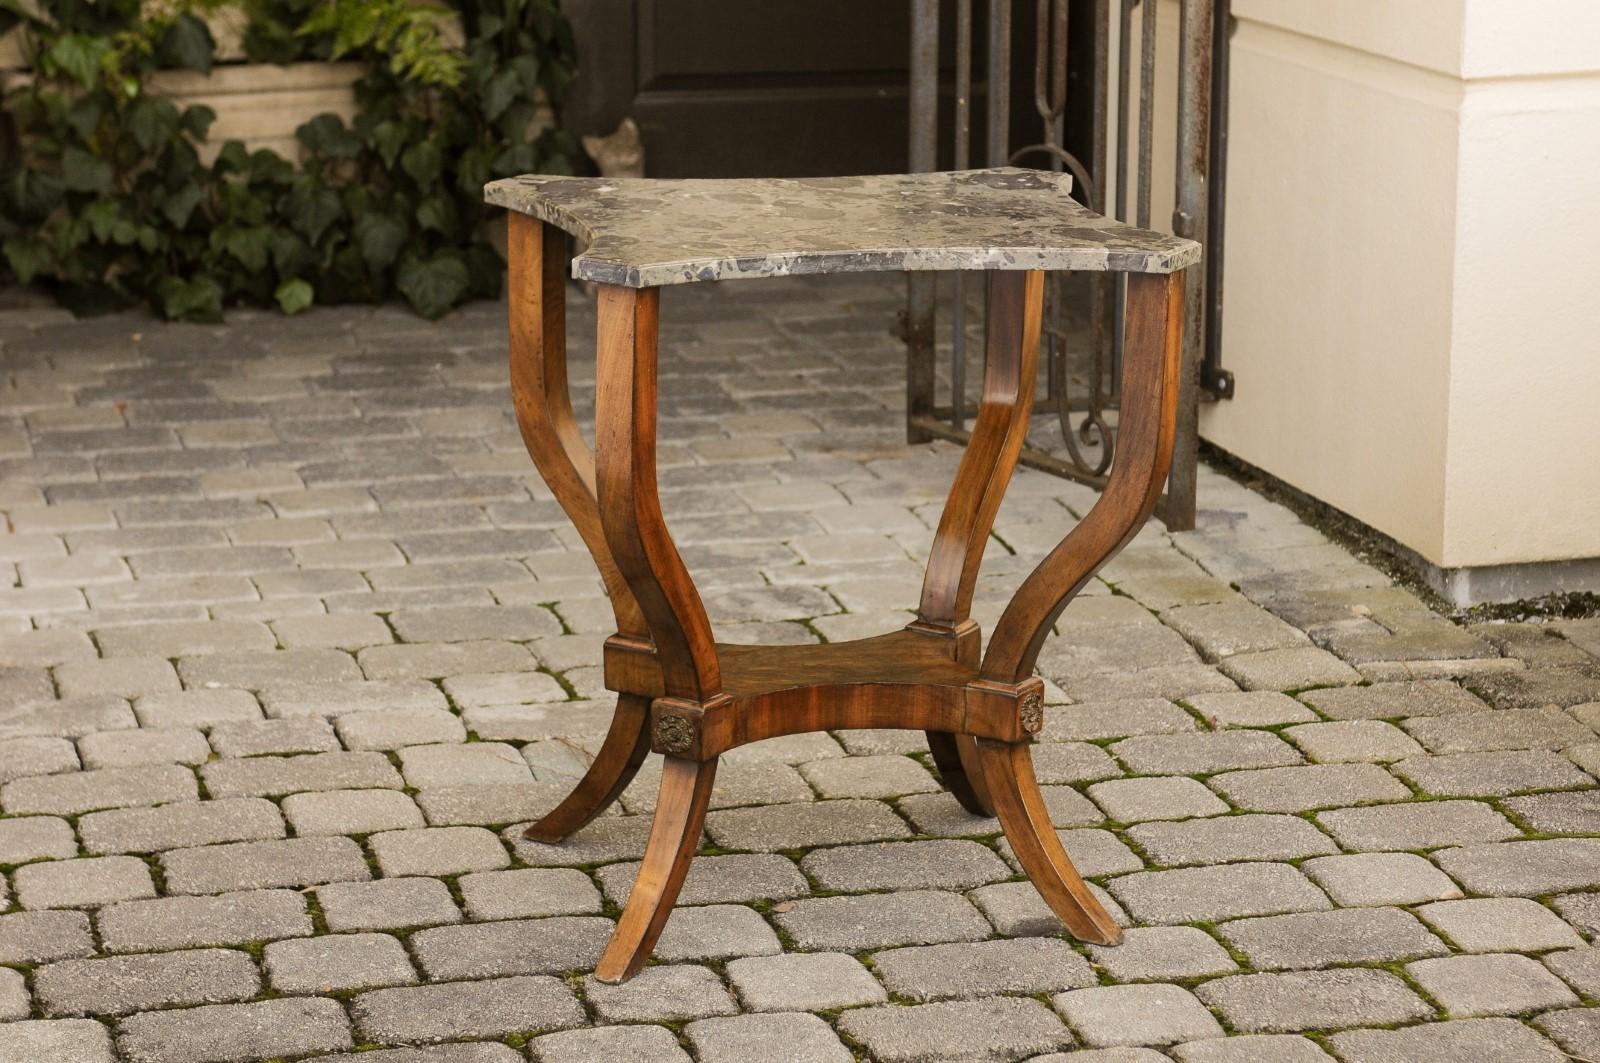 A French walnut side table from the third quarter of the 19th century, with shaped marble top and narrow shelf. Born in the later years of France's last Emperor Napoleon III, this exquisite side table features a variegated marble top with canted